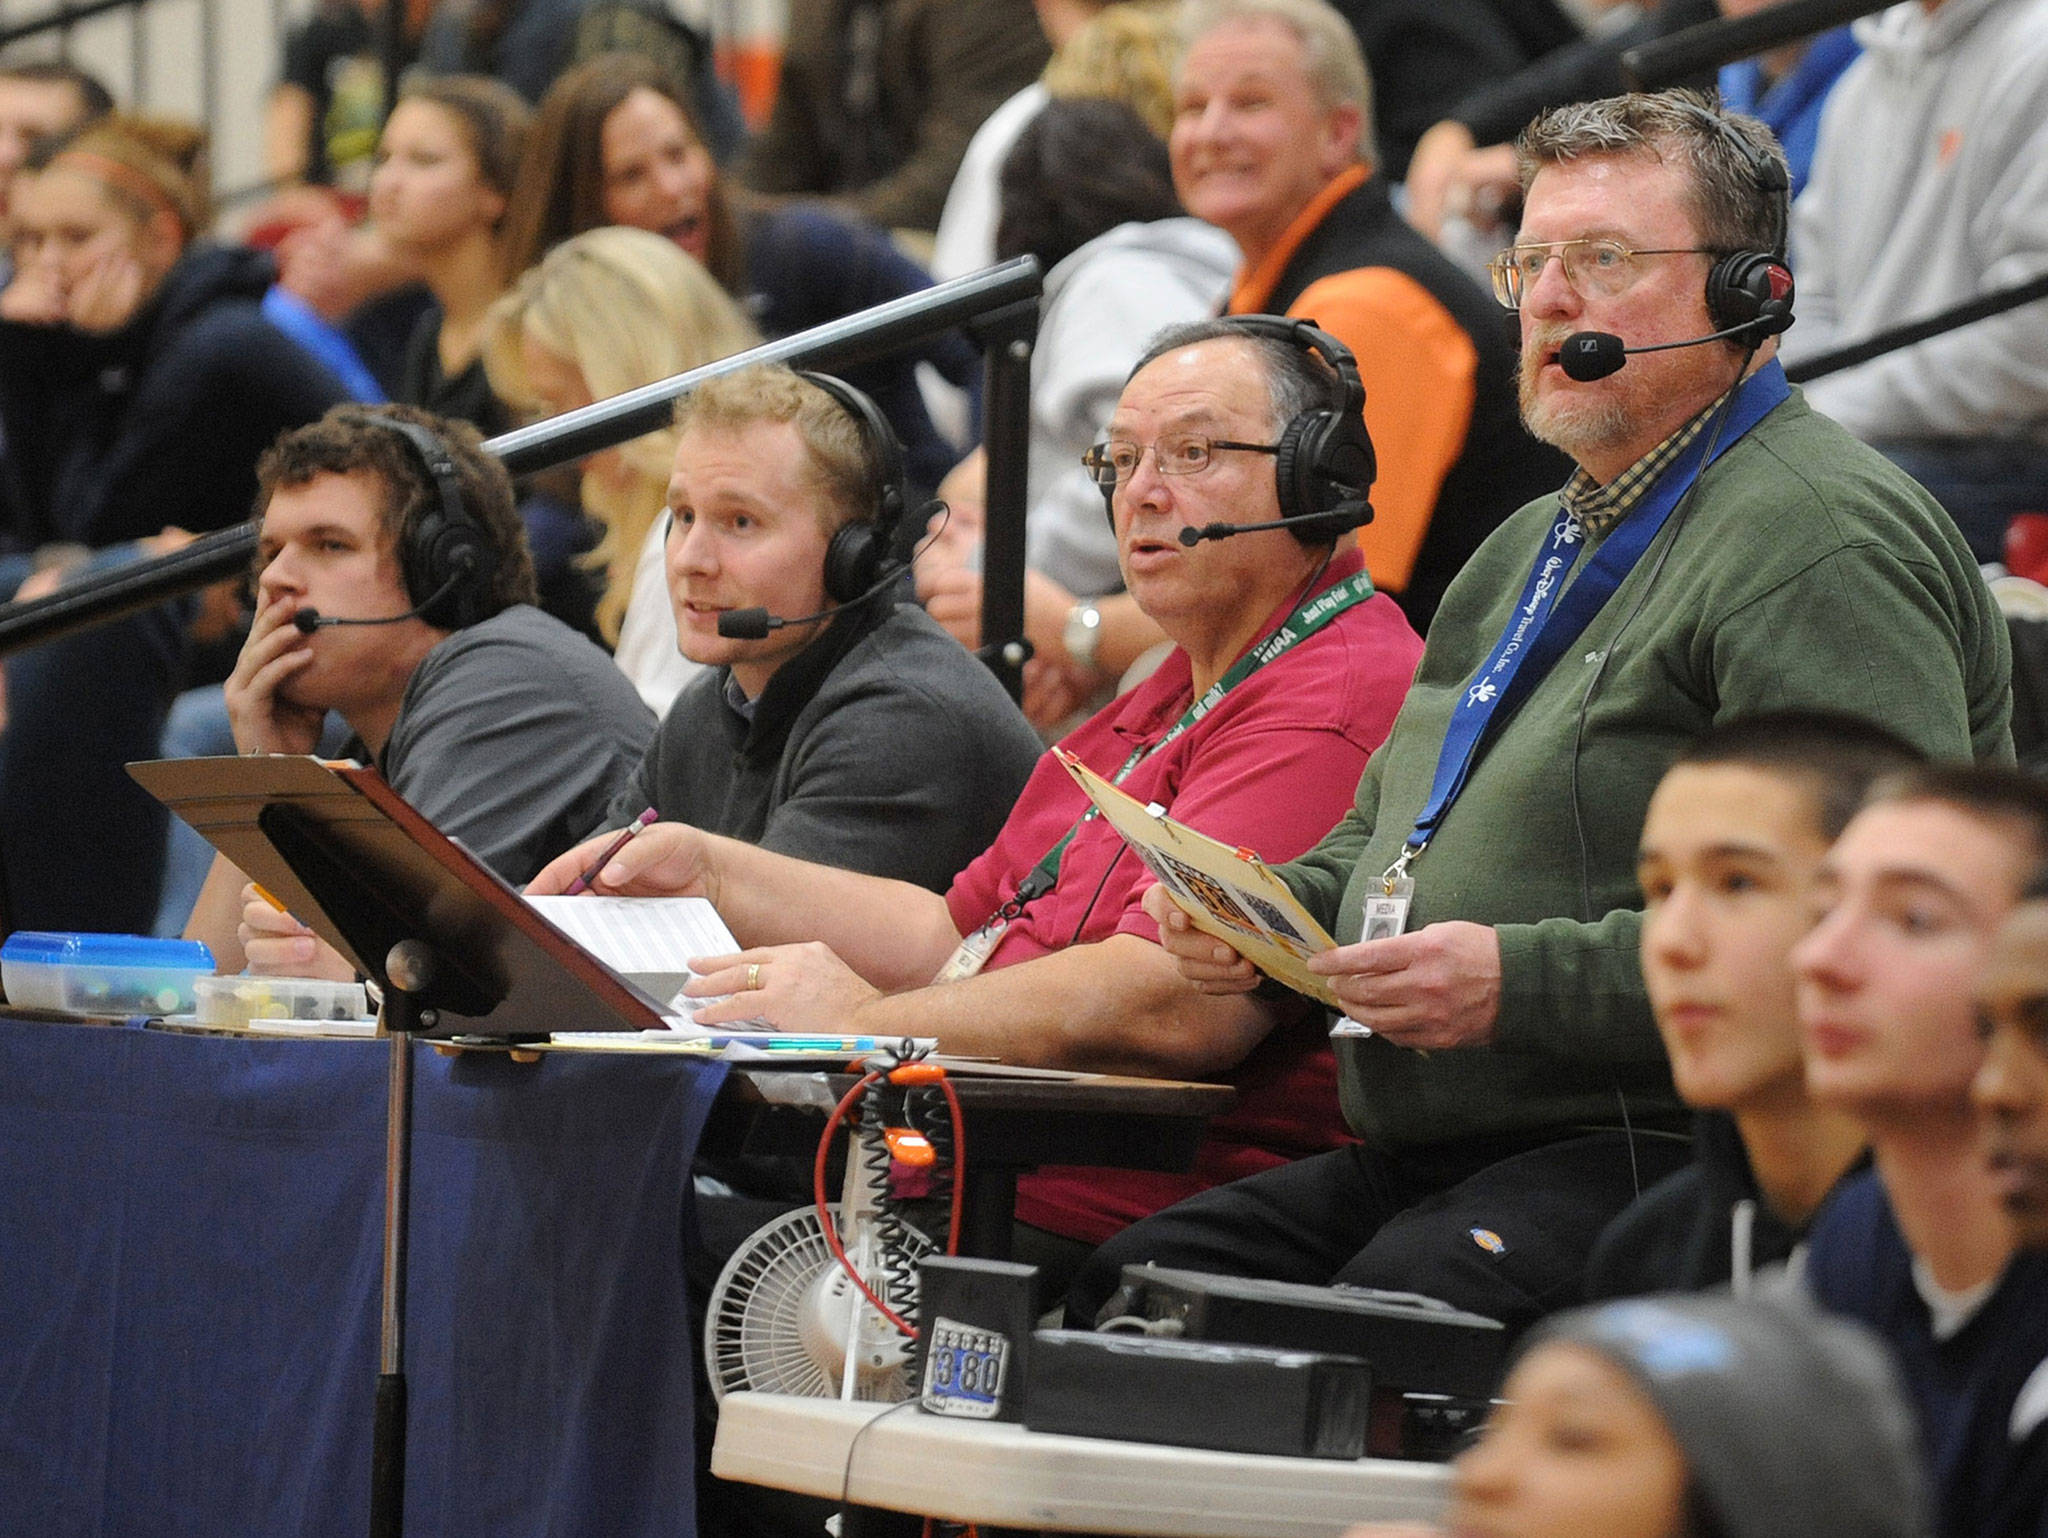 Broadcaster Tom Lafferty (right) is a member of the Snohomish County Sports Hall of Fame’s 2020 class. (Photo provided by the Snohomish County Sports Hall of Fame)